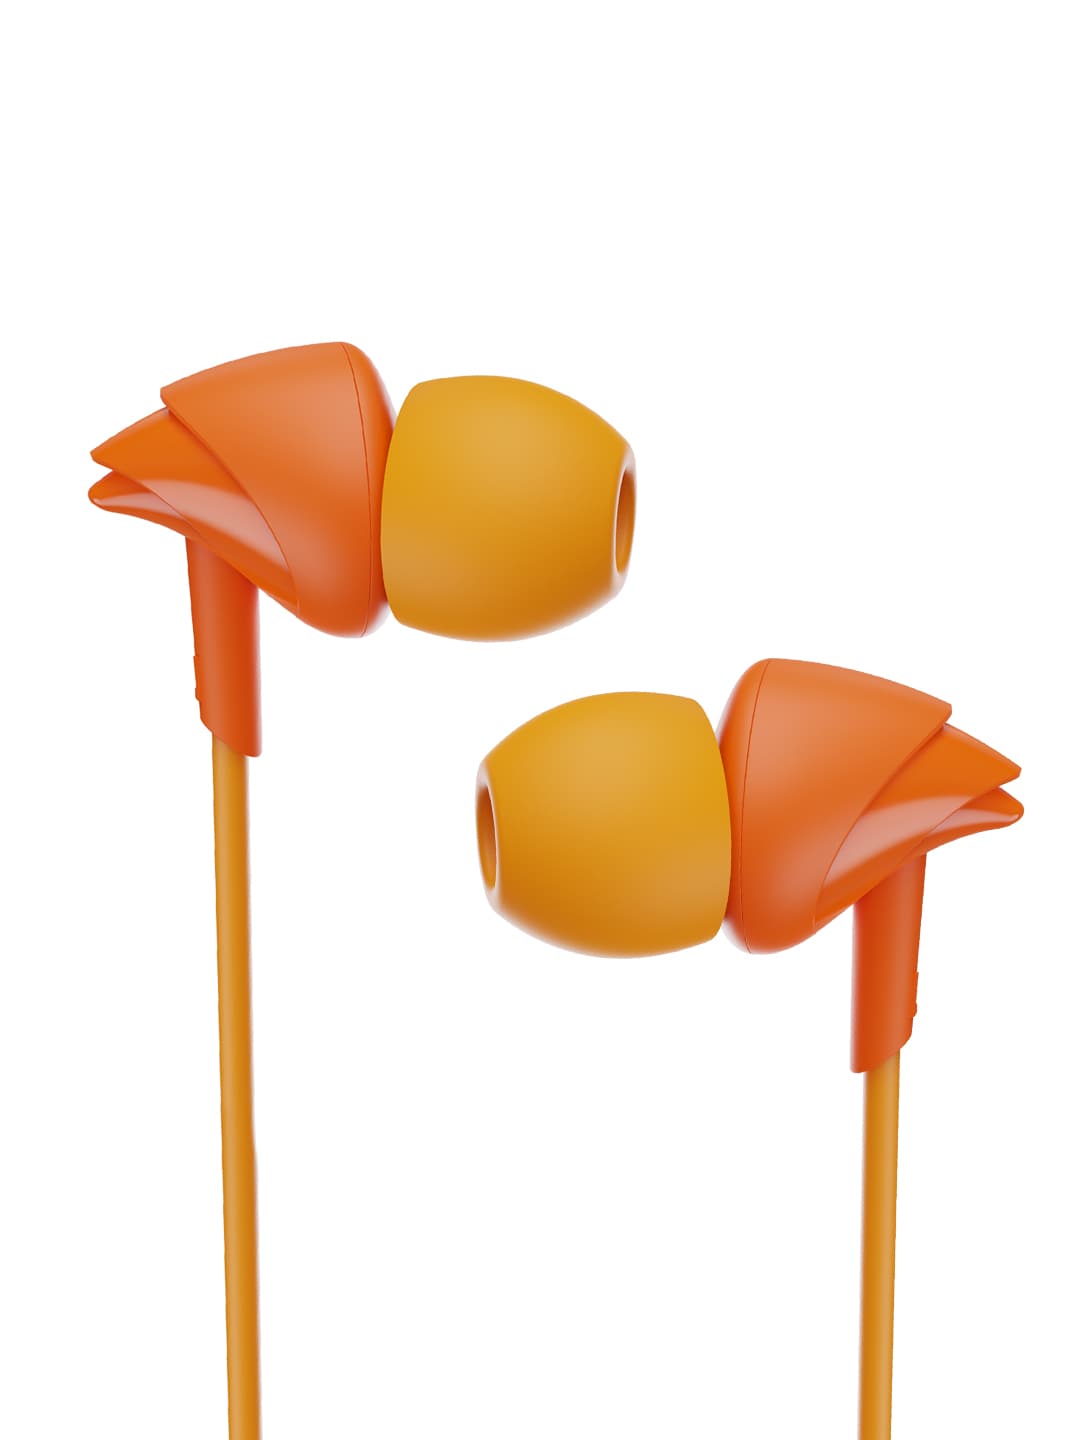 boAt BassHeads 100 M Mint Orange Wired Earphones with Hawk-Inspired Design & Mic Price in India